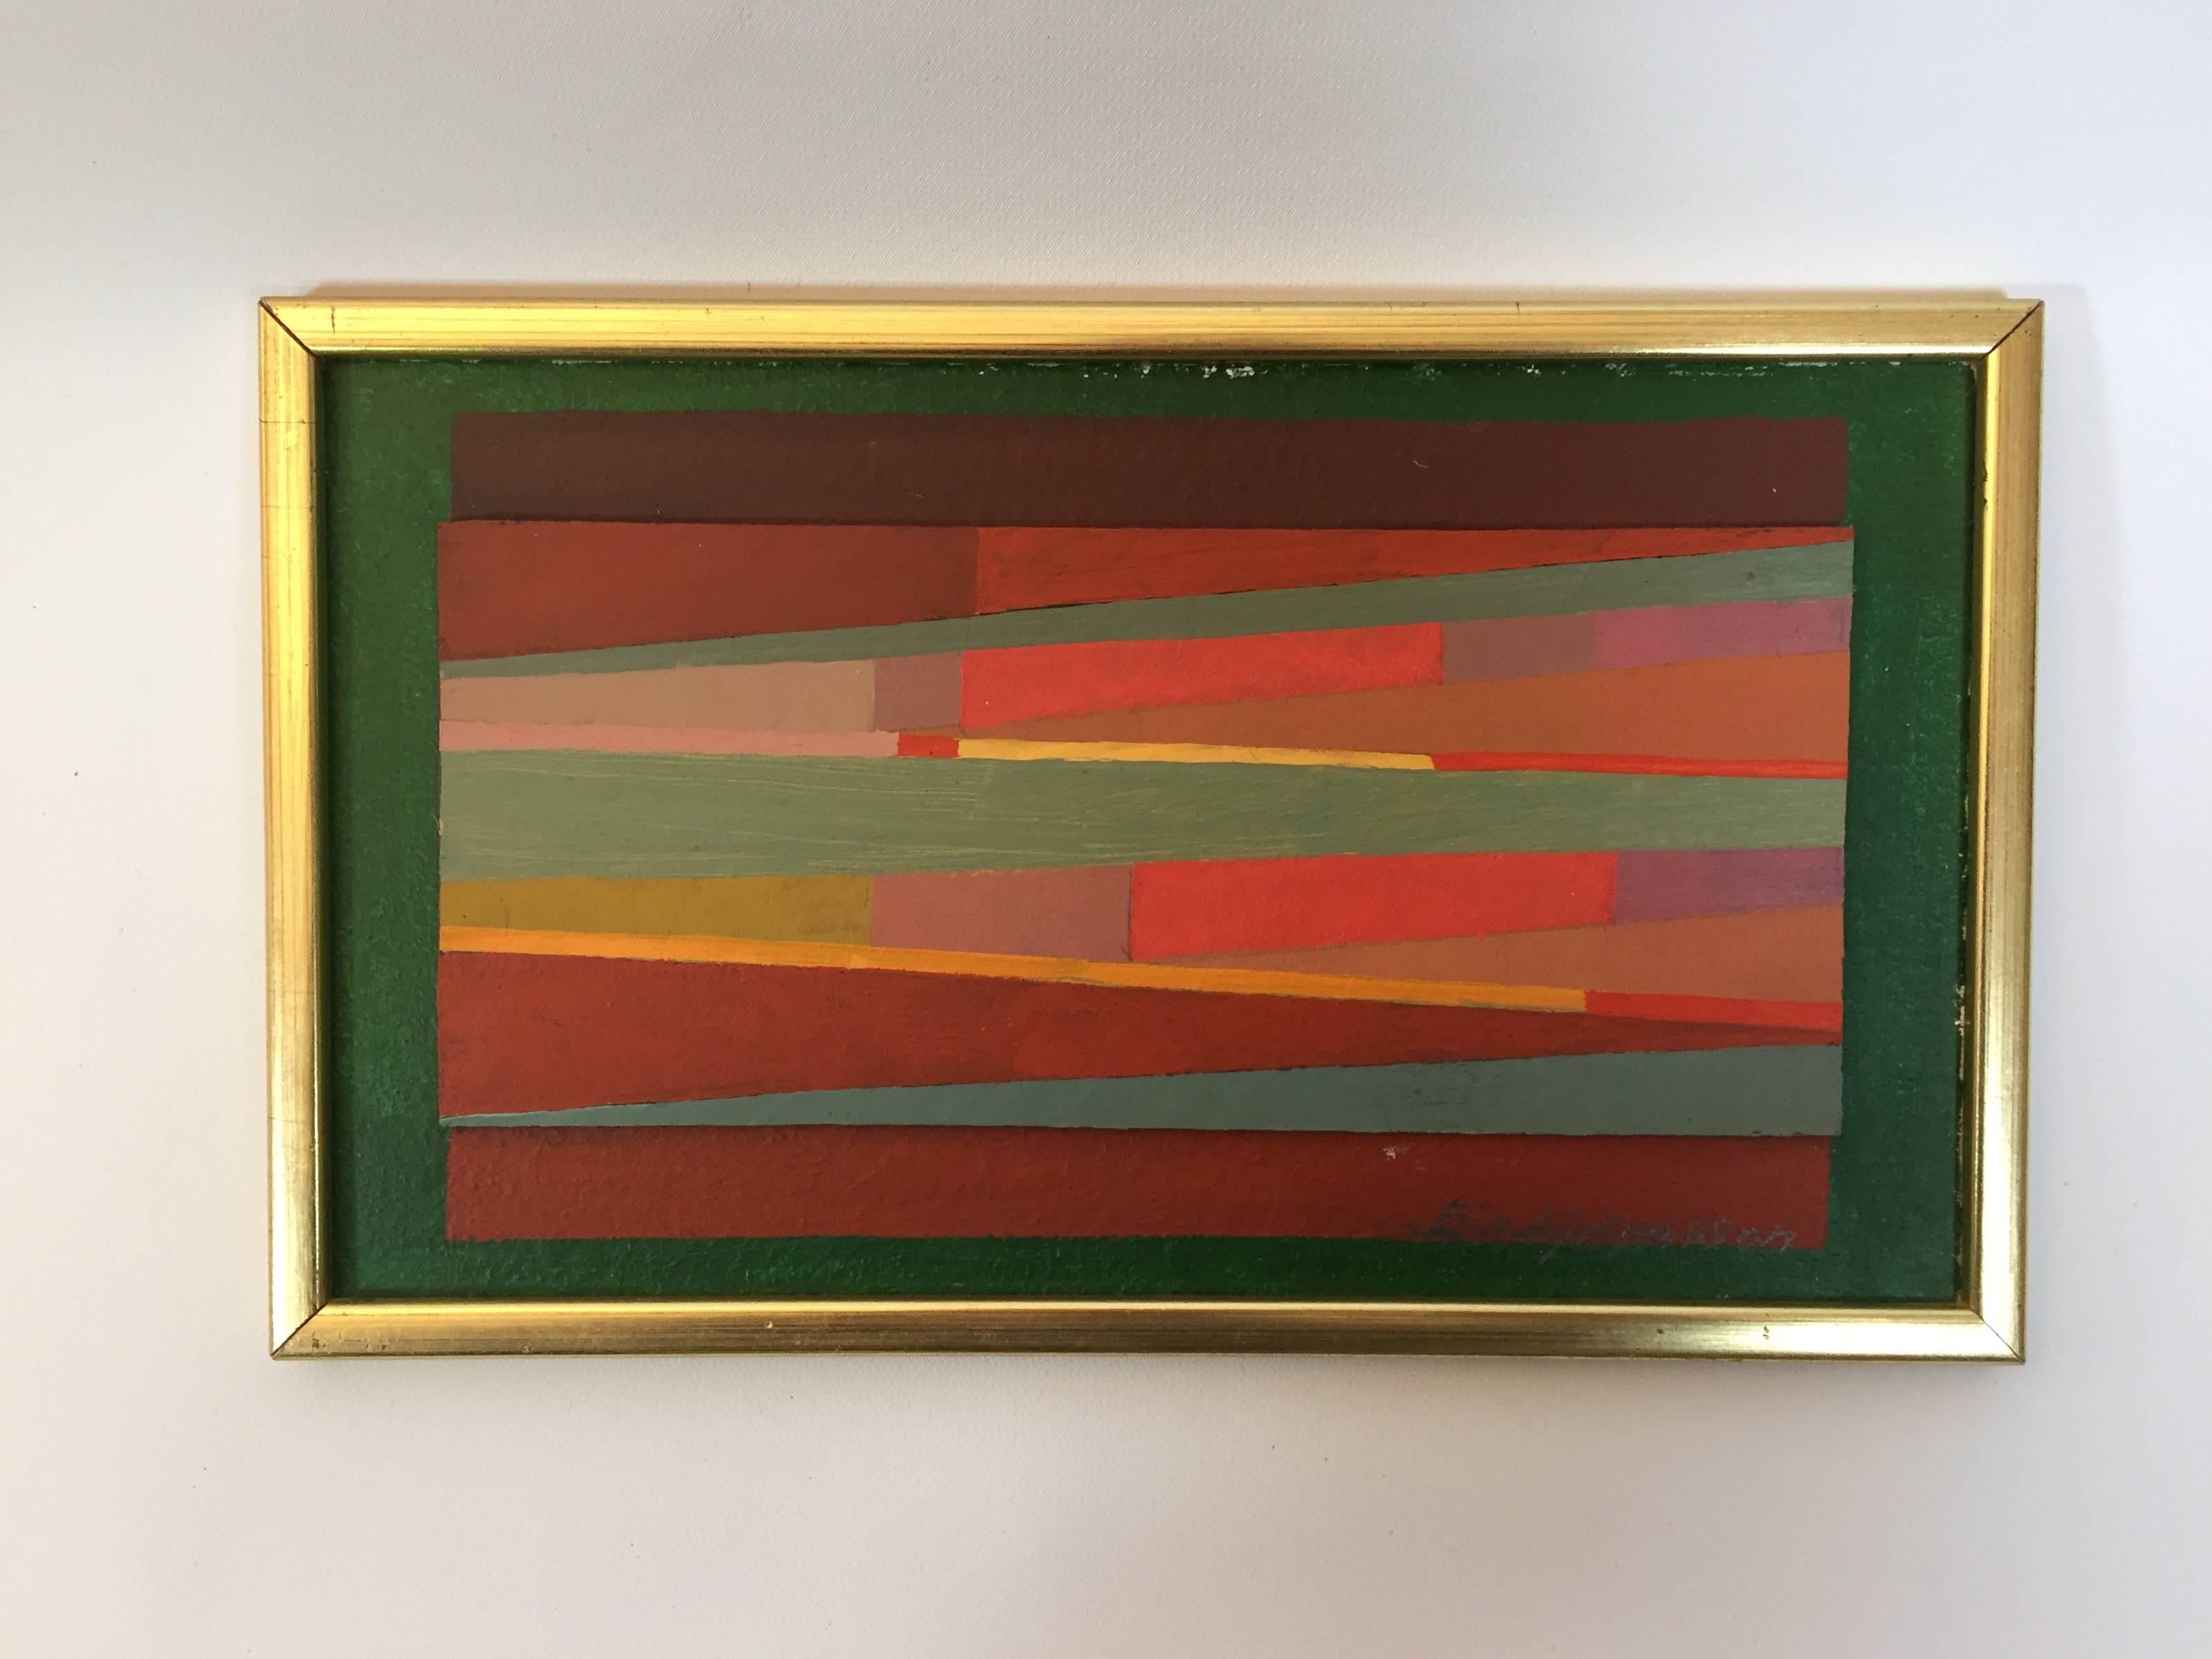 Nice oil paint on Masonite by Swedish modern artist, Torsten Esbjornsson, (1925-2012). Fully inscribed and dated on verso and signed in pencil lower right, Esbjornsson.

Framed in a simple gilded wood molding. Overall dimensions are 12